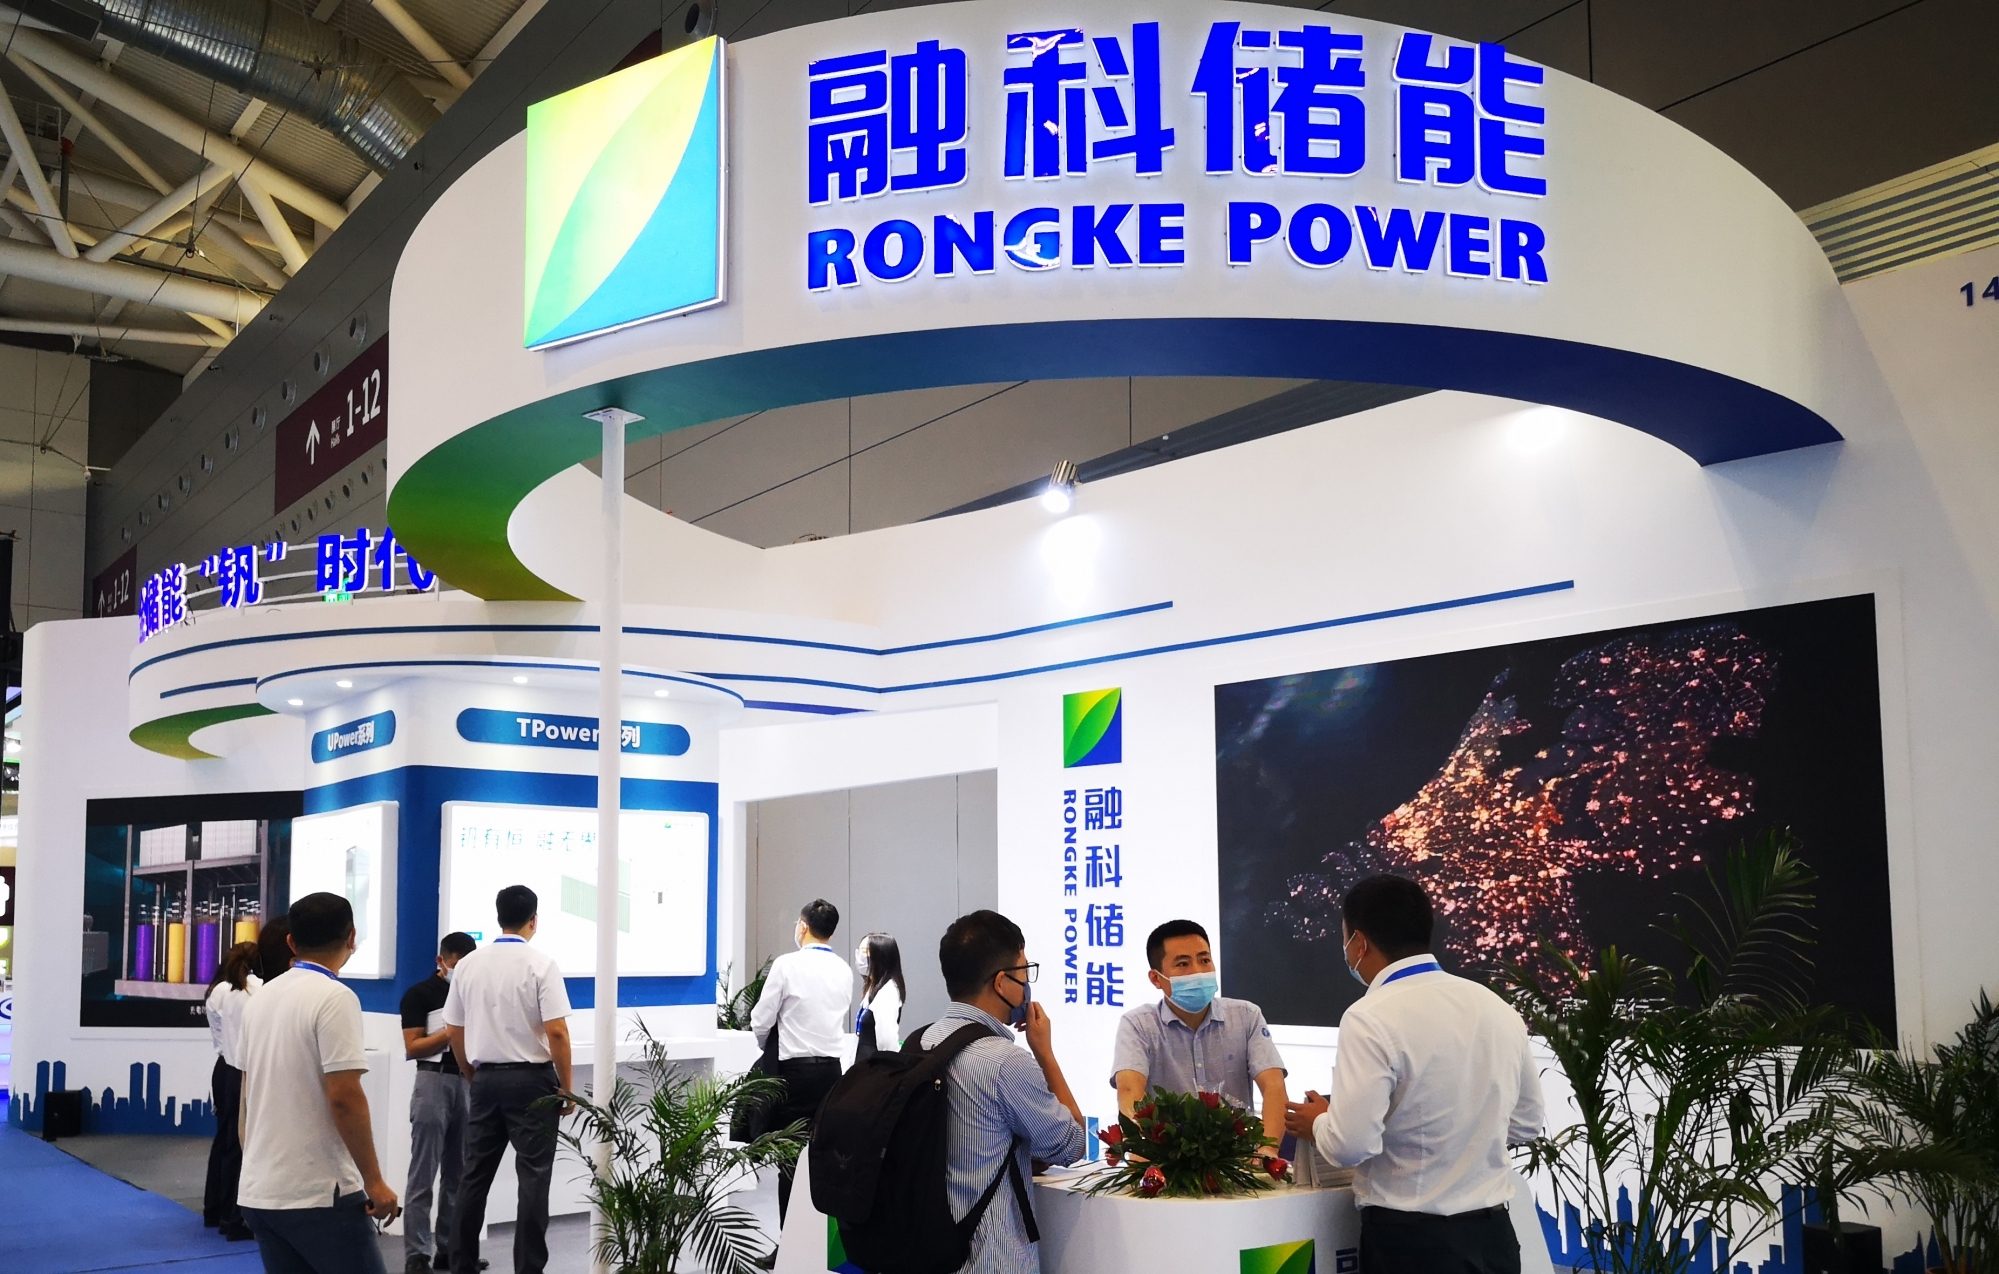 Legend Capital leads $145m round for Chinese battery solutions provider Rongke